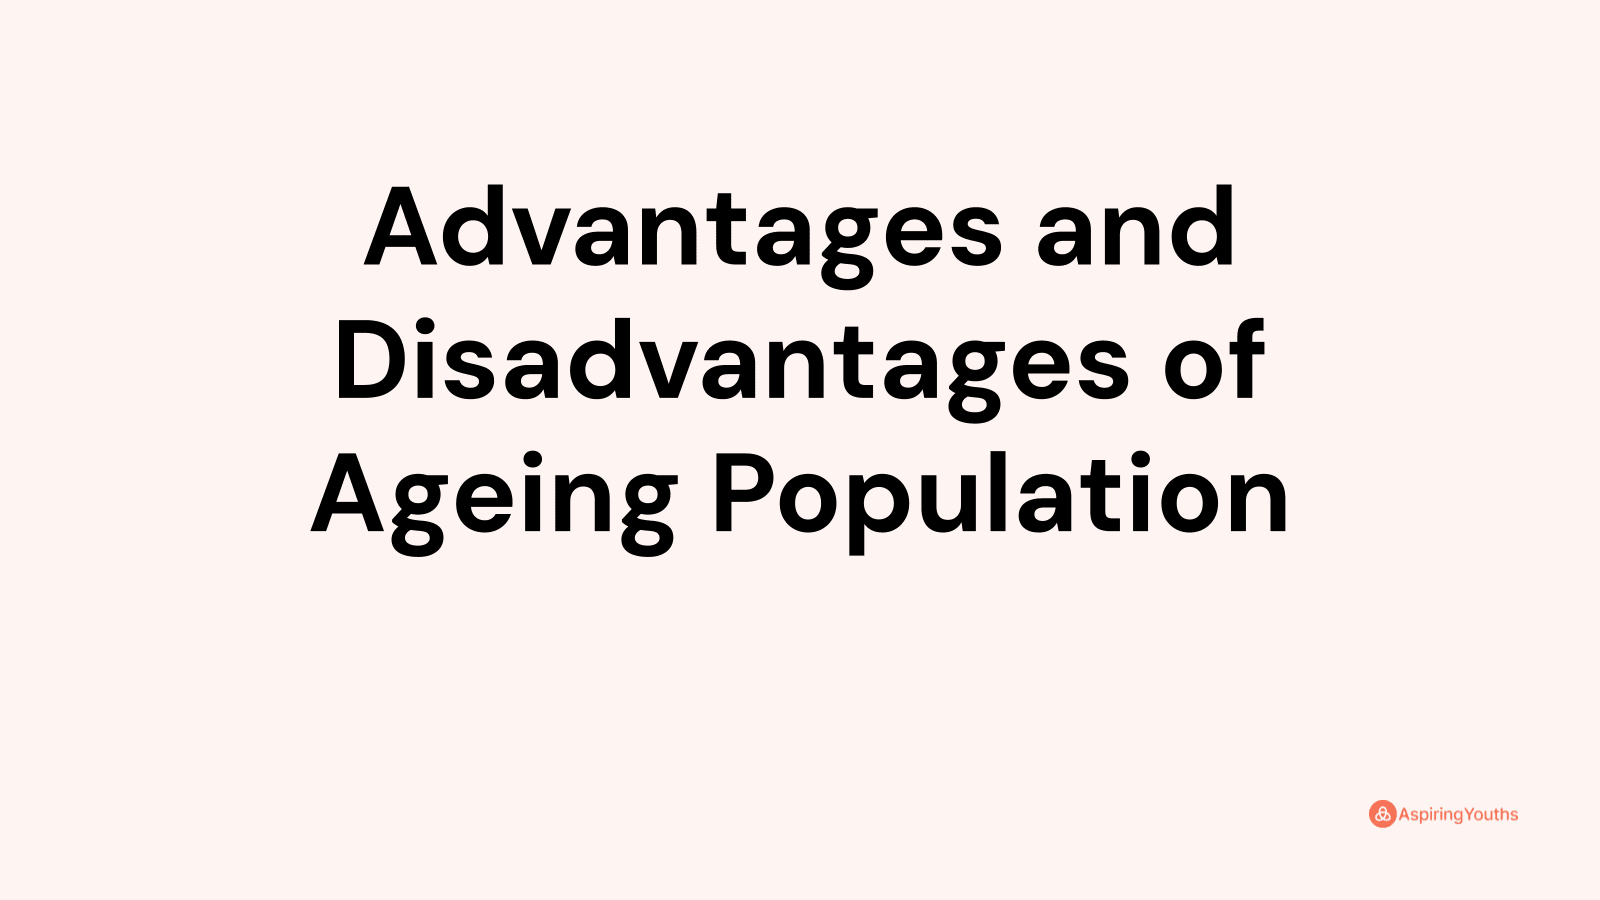 Advantages and disadvantages of Ageing Population